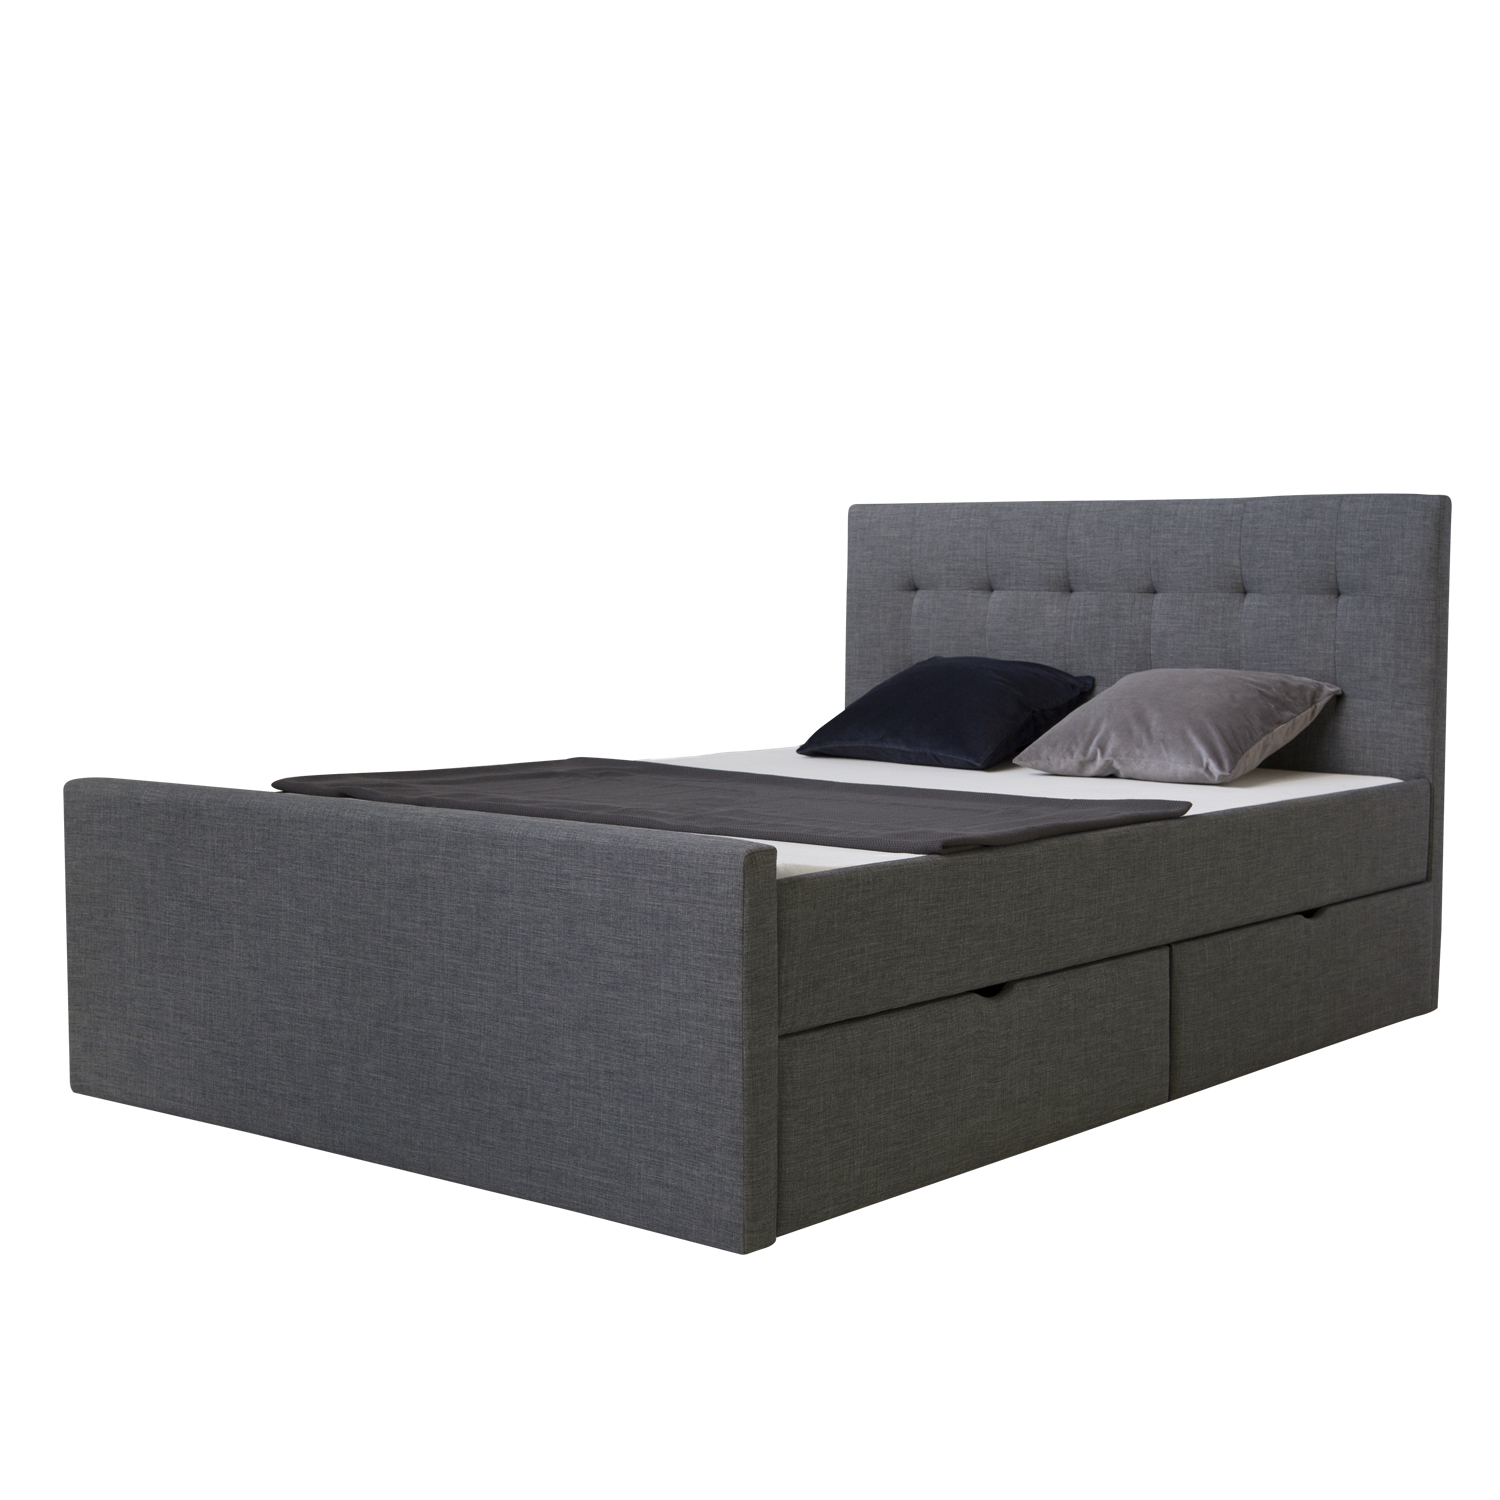 Upholstered Bed 90 120 140 160 180 x 200 cm Double Bed Fabric Bedstead Slatted Frame Anthracite